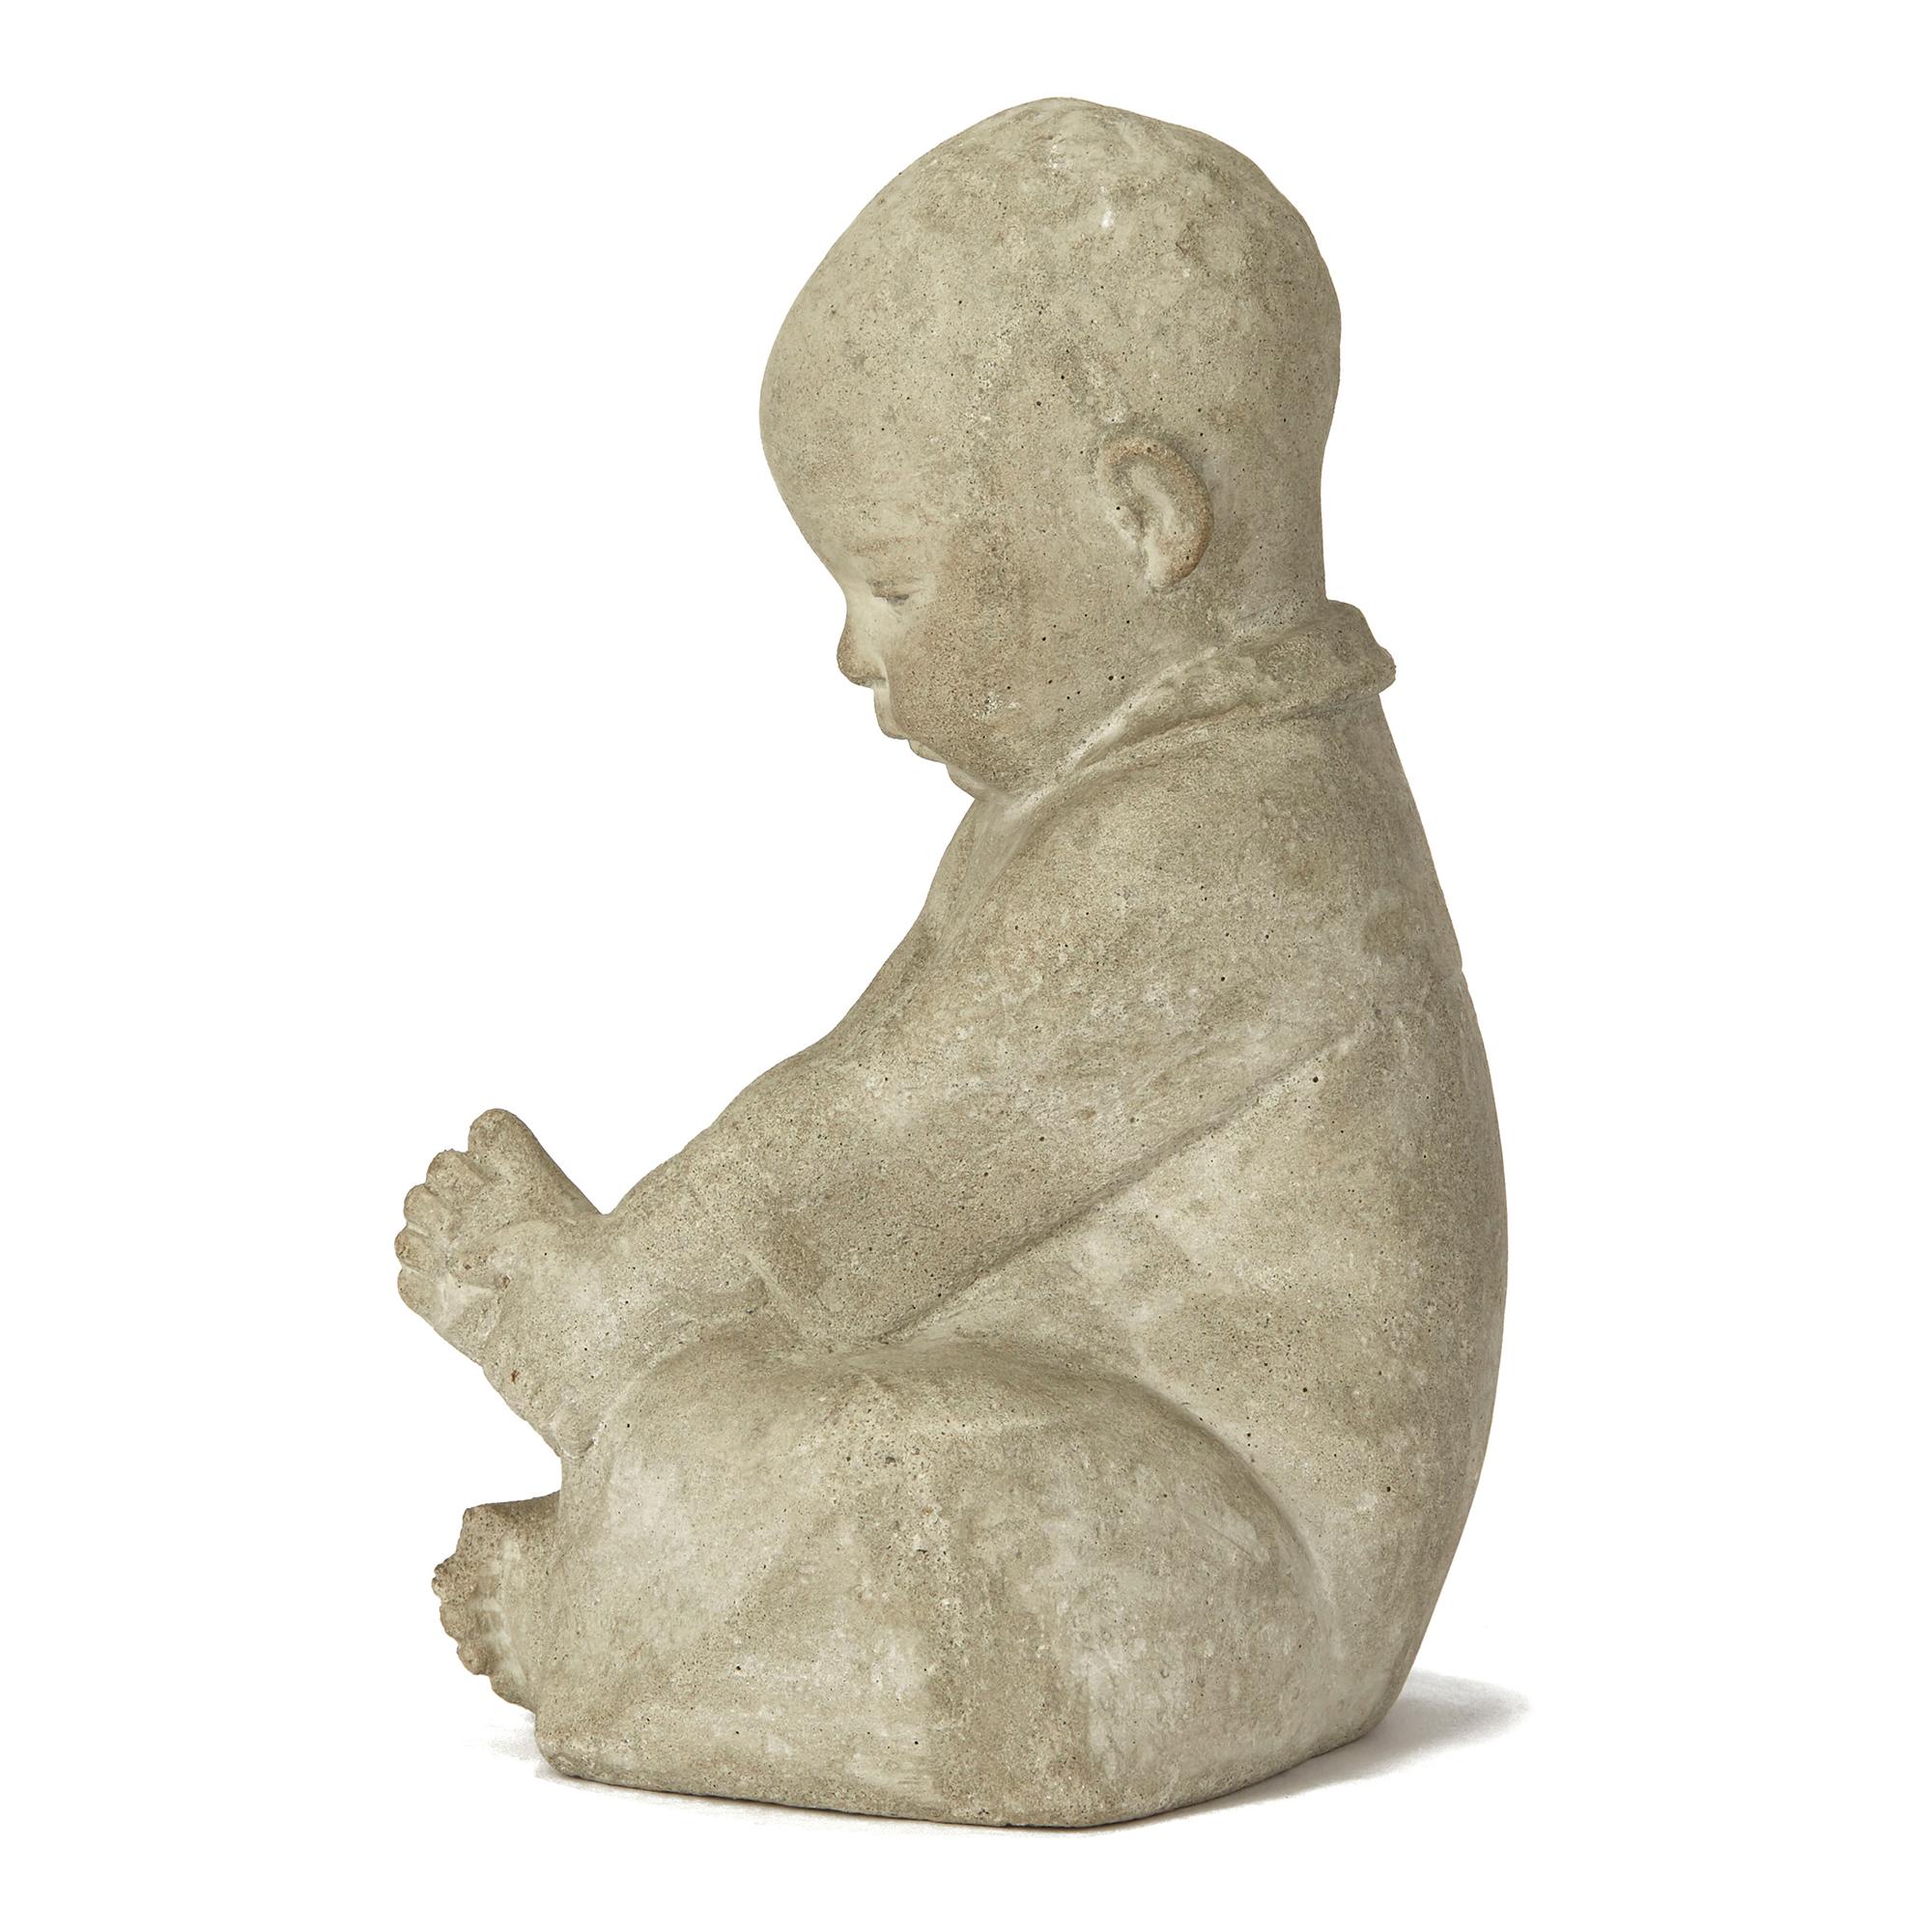 An exceptional charming continental, possibly Scandinavian, carved stone figure of a young seated infant holding his left foot. The right leg and lower body is carved into the base with the toes of the right foot emerging to the front and the infant